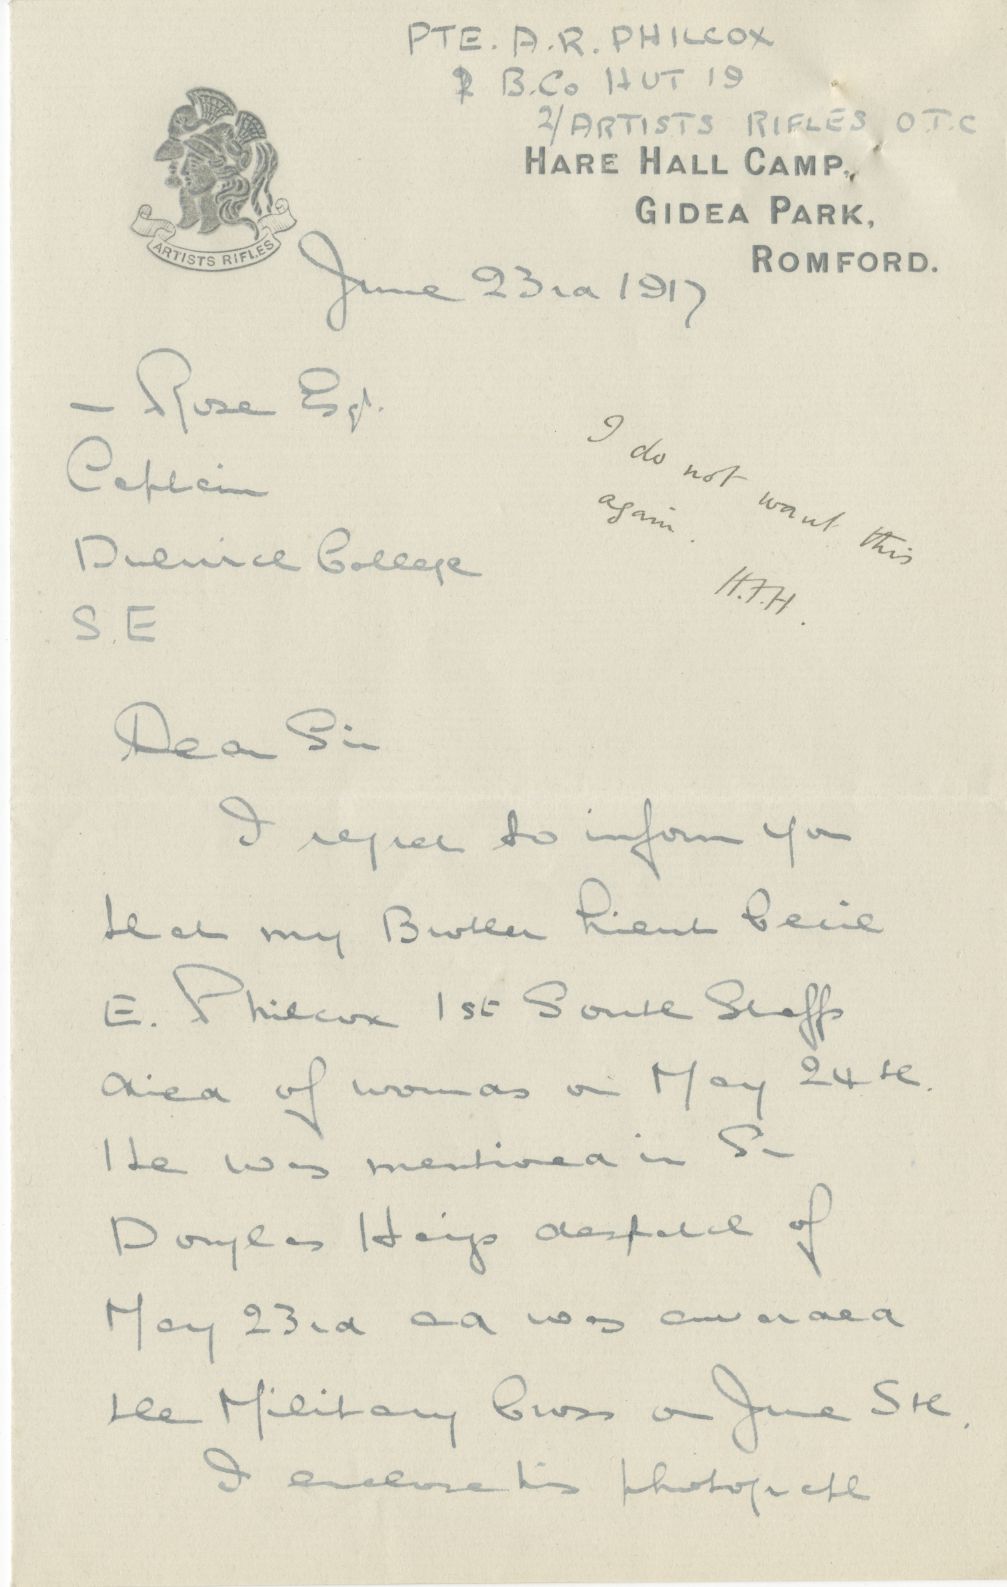 Philcox CE Brother Letter 1